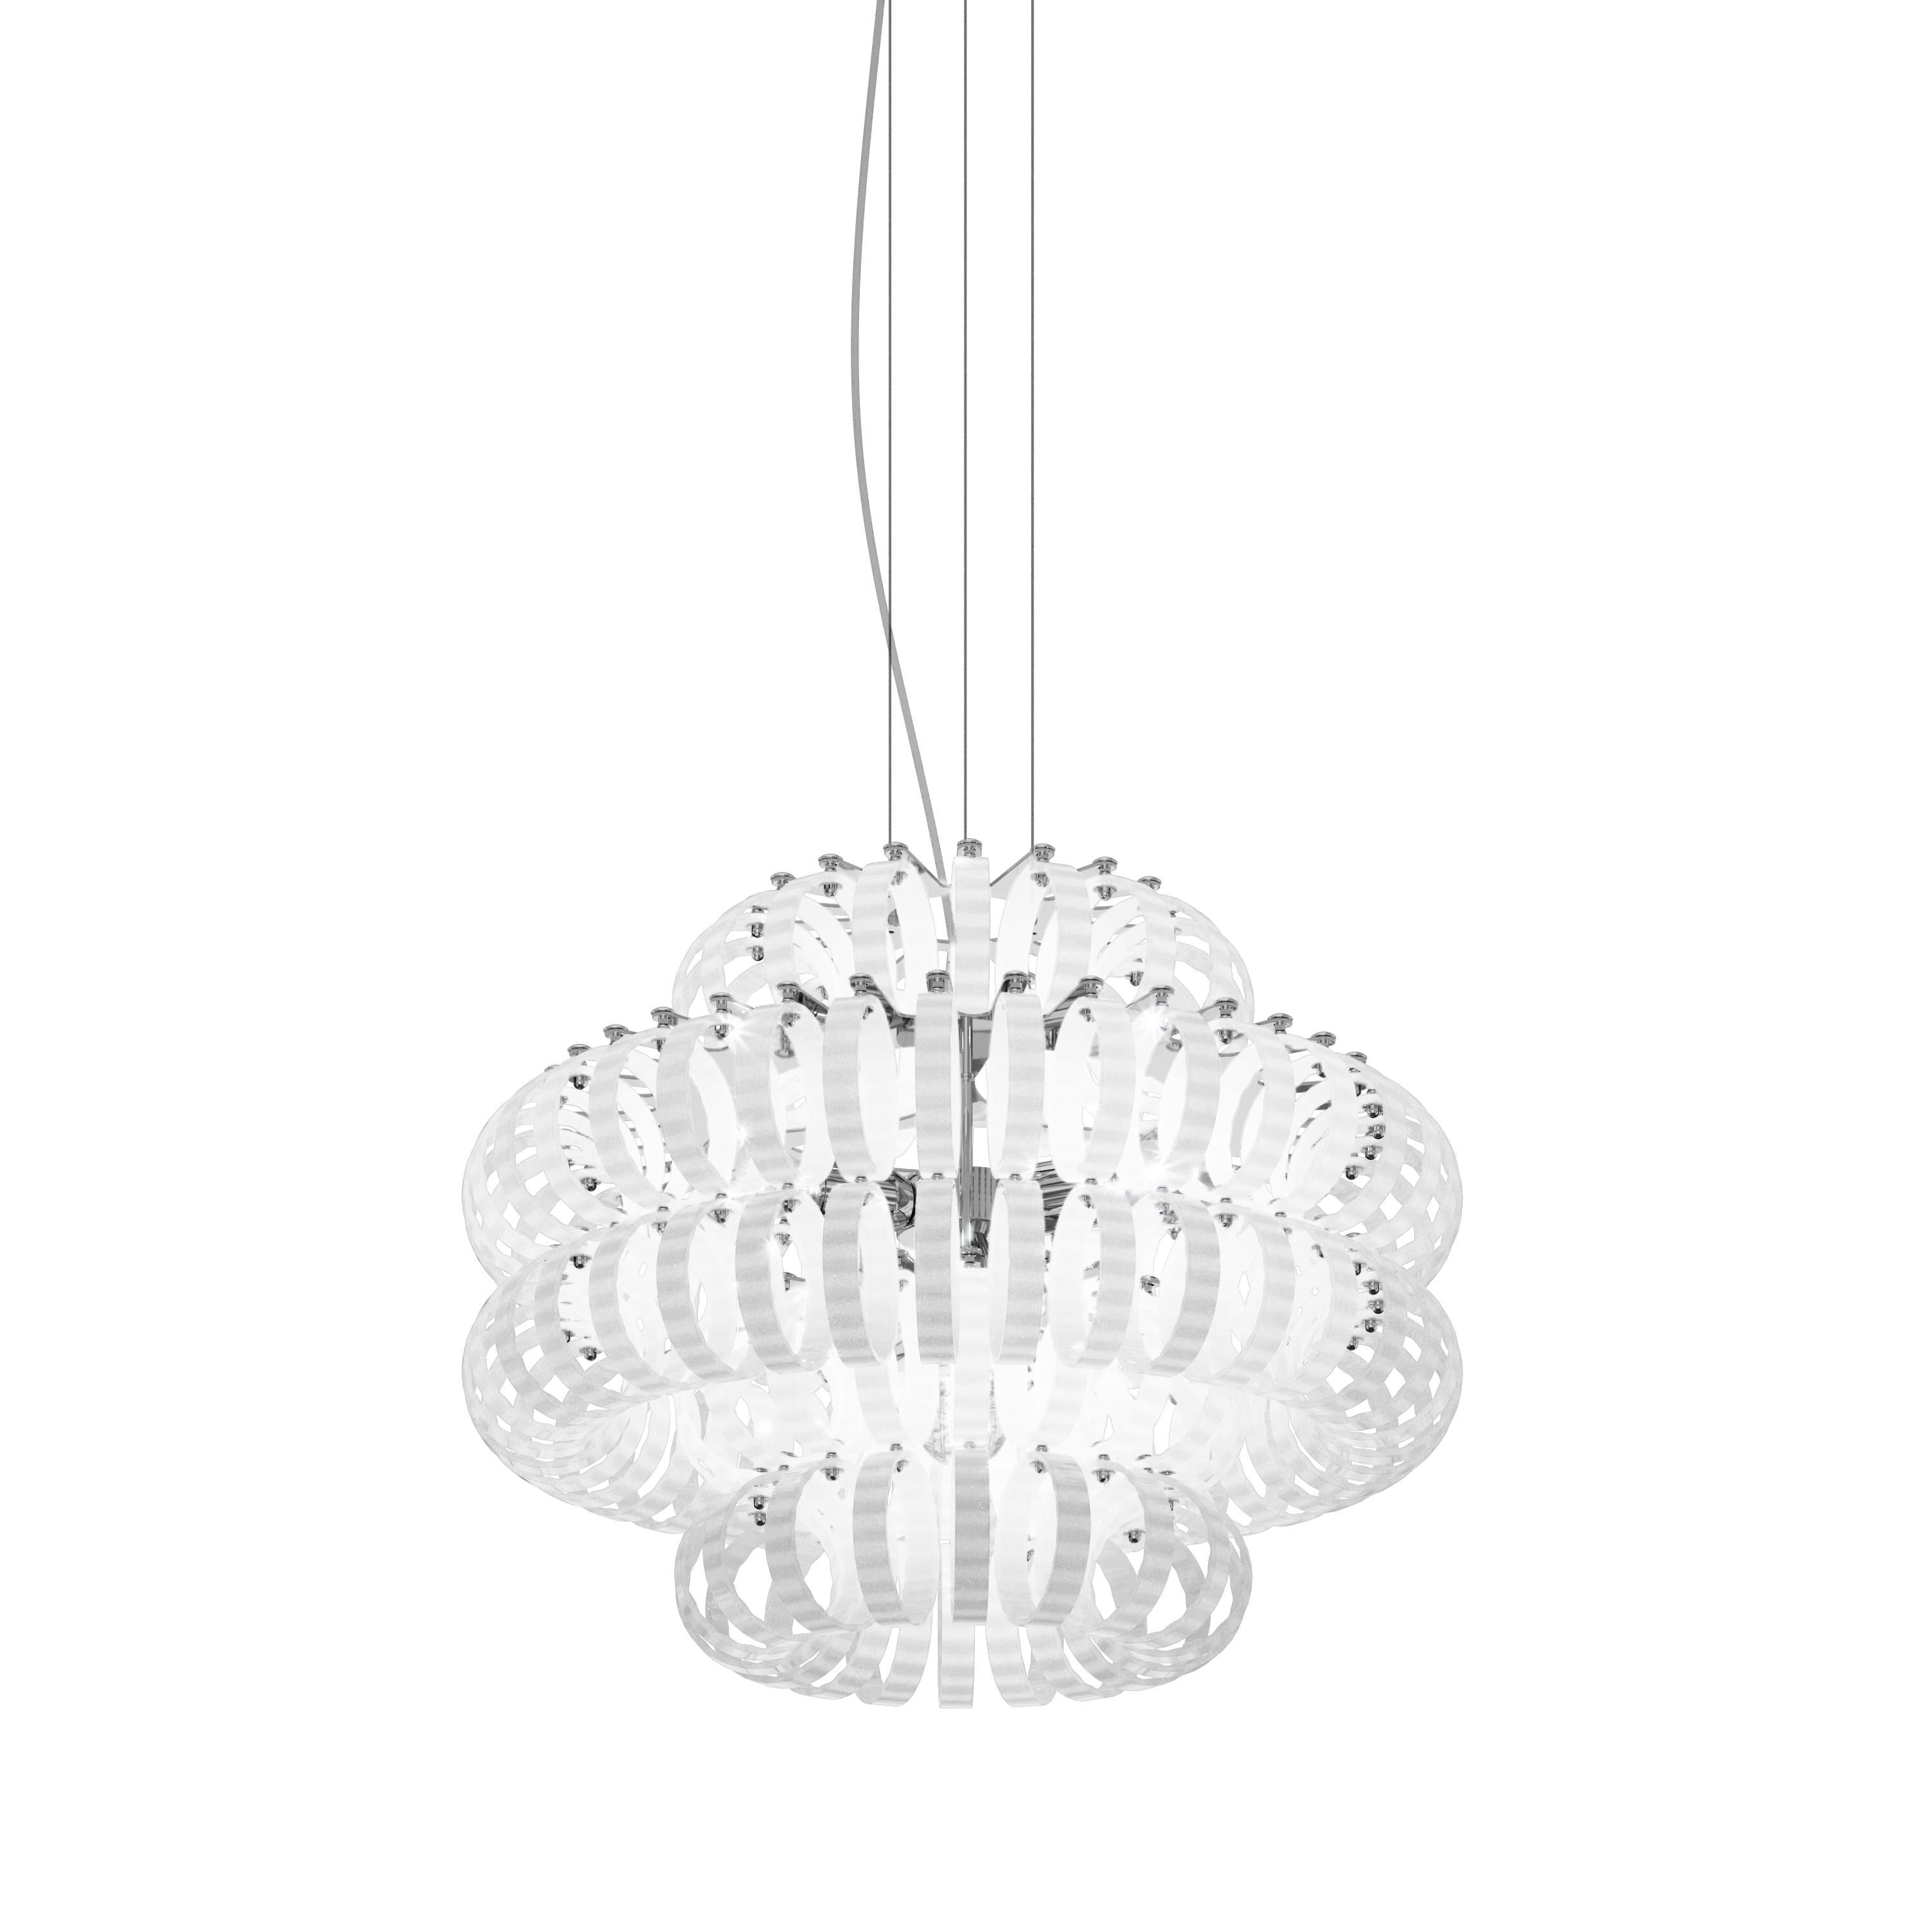 Modern Vistosi Ecos Pendant Light in White Striped Glass And Glossy Chrome Frame For Sale